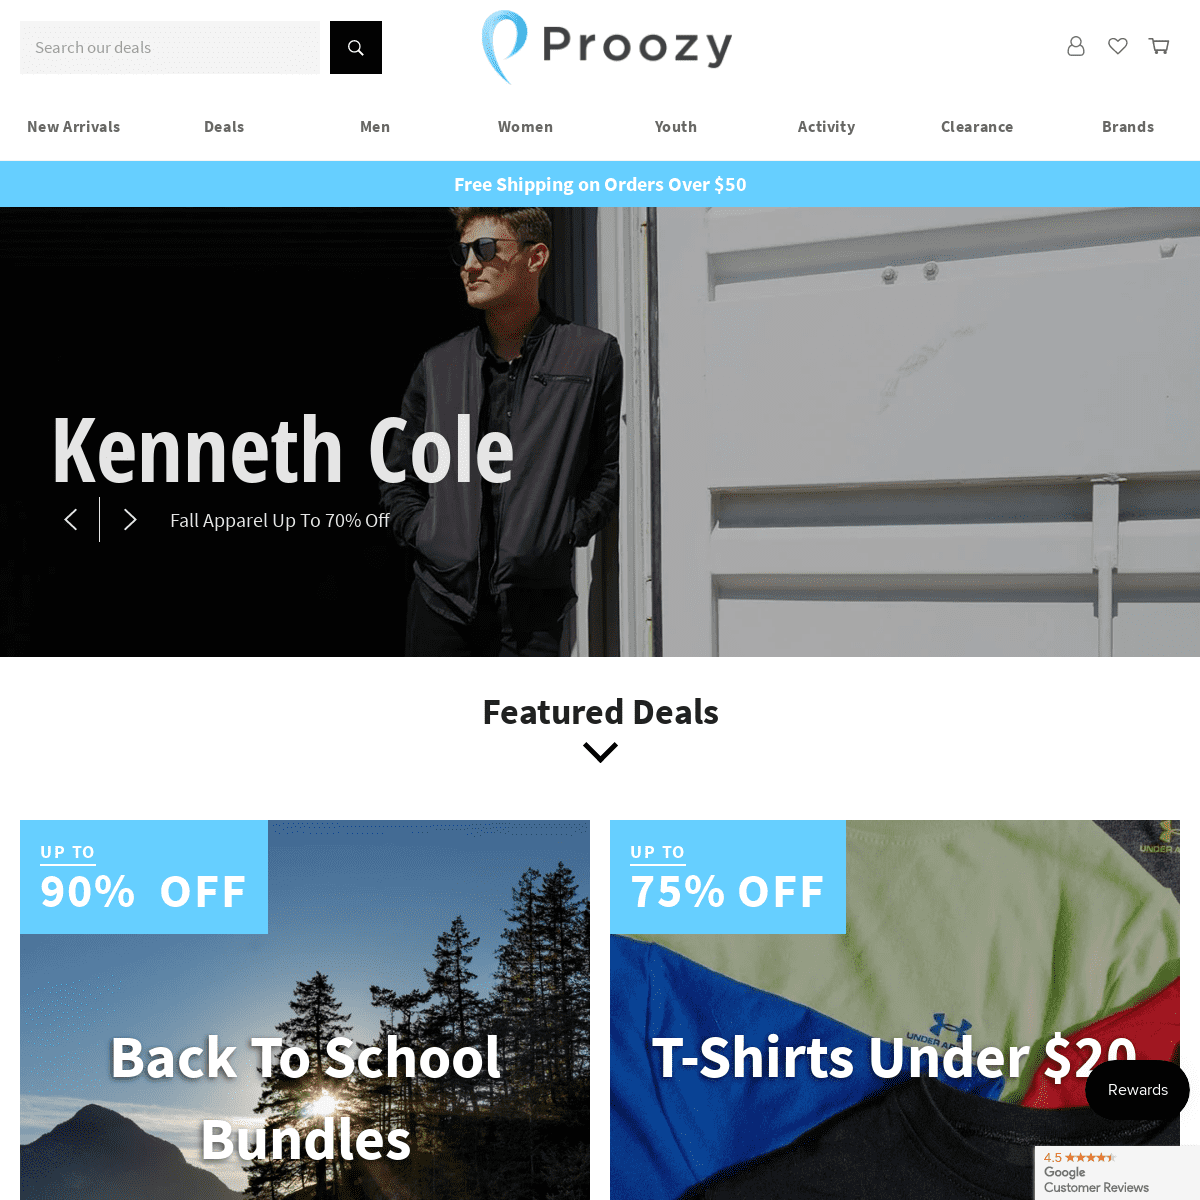 A complete backup of proozy.com